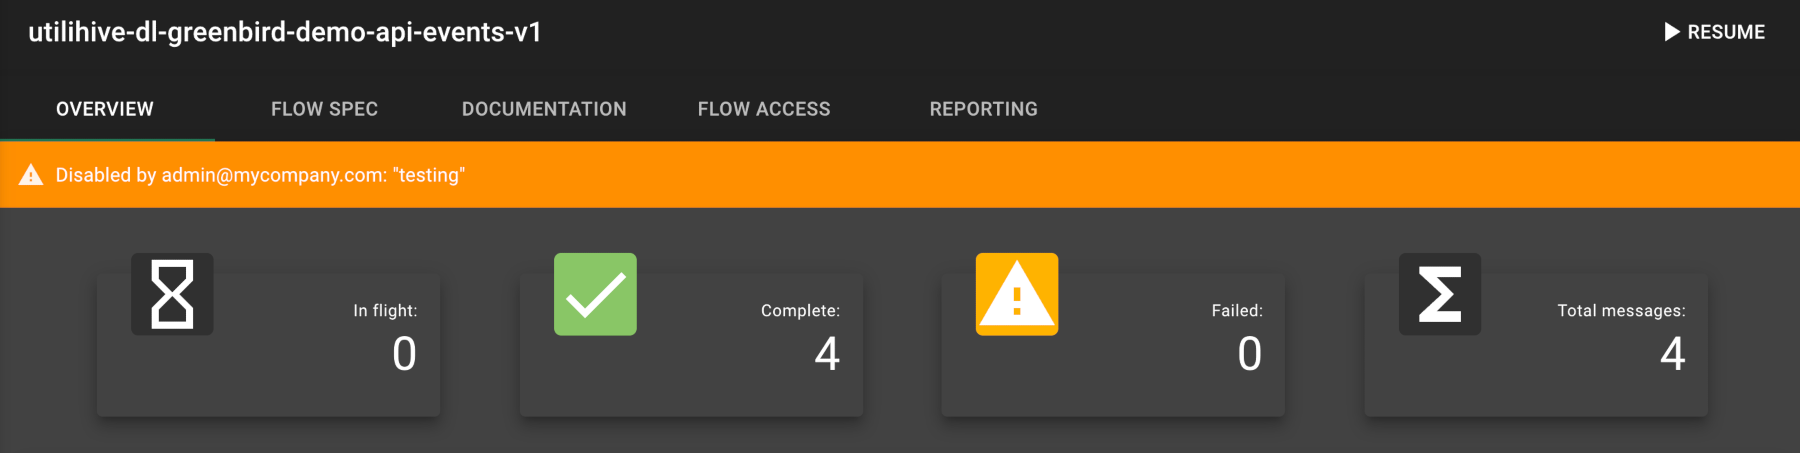 The flow page displays an orange banner that says it was disabled by admin@mycompany.com for testing reasons.